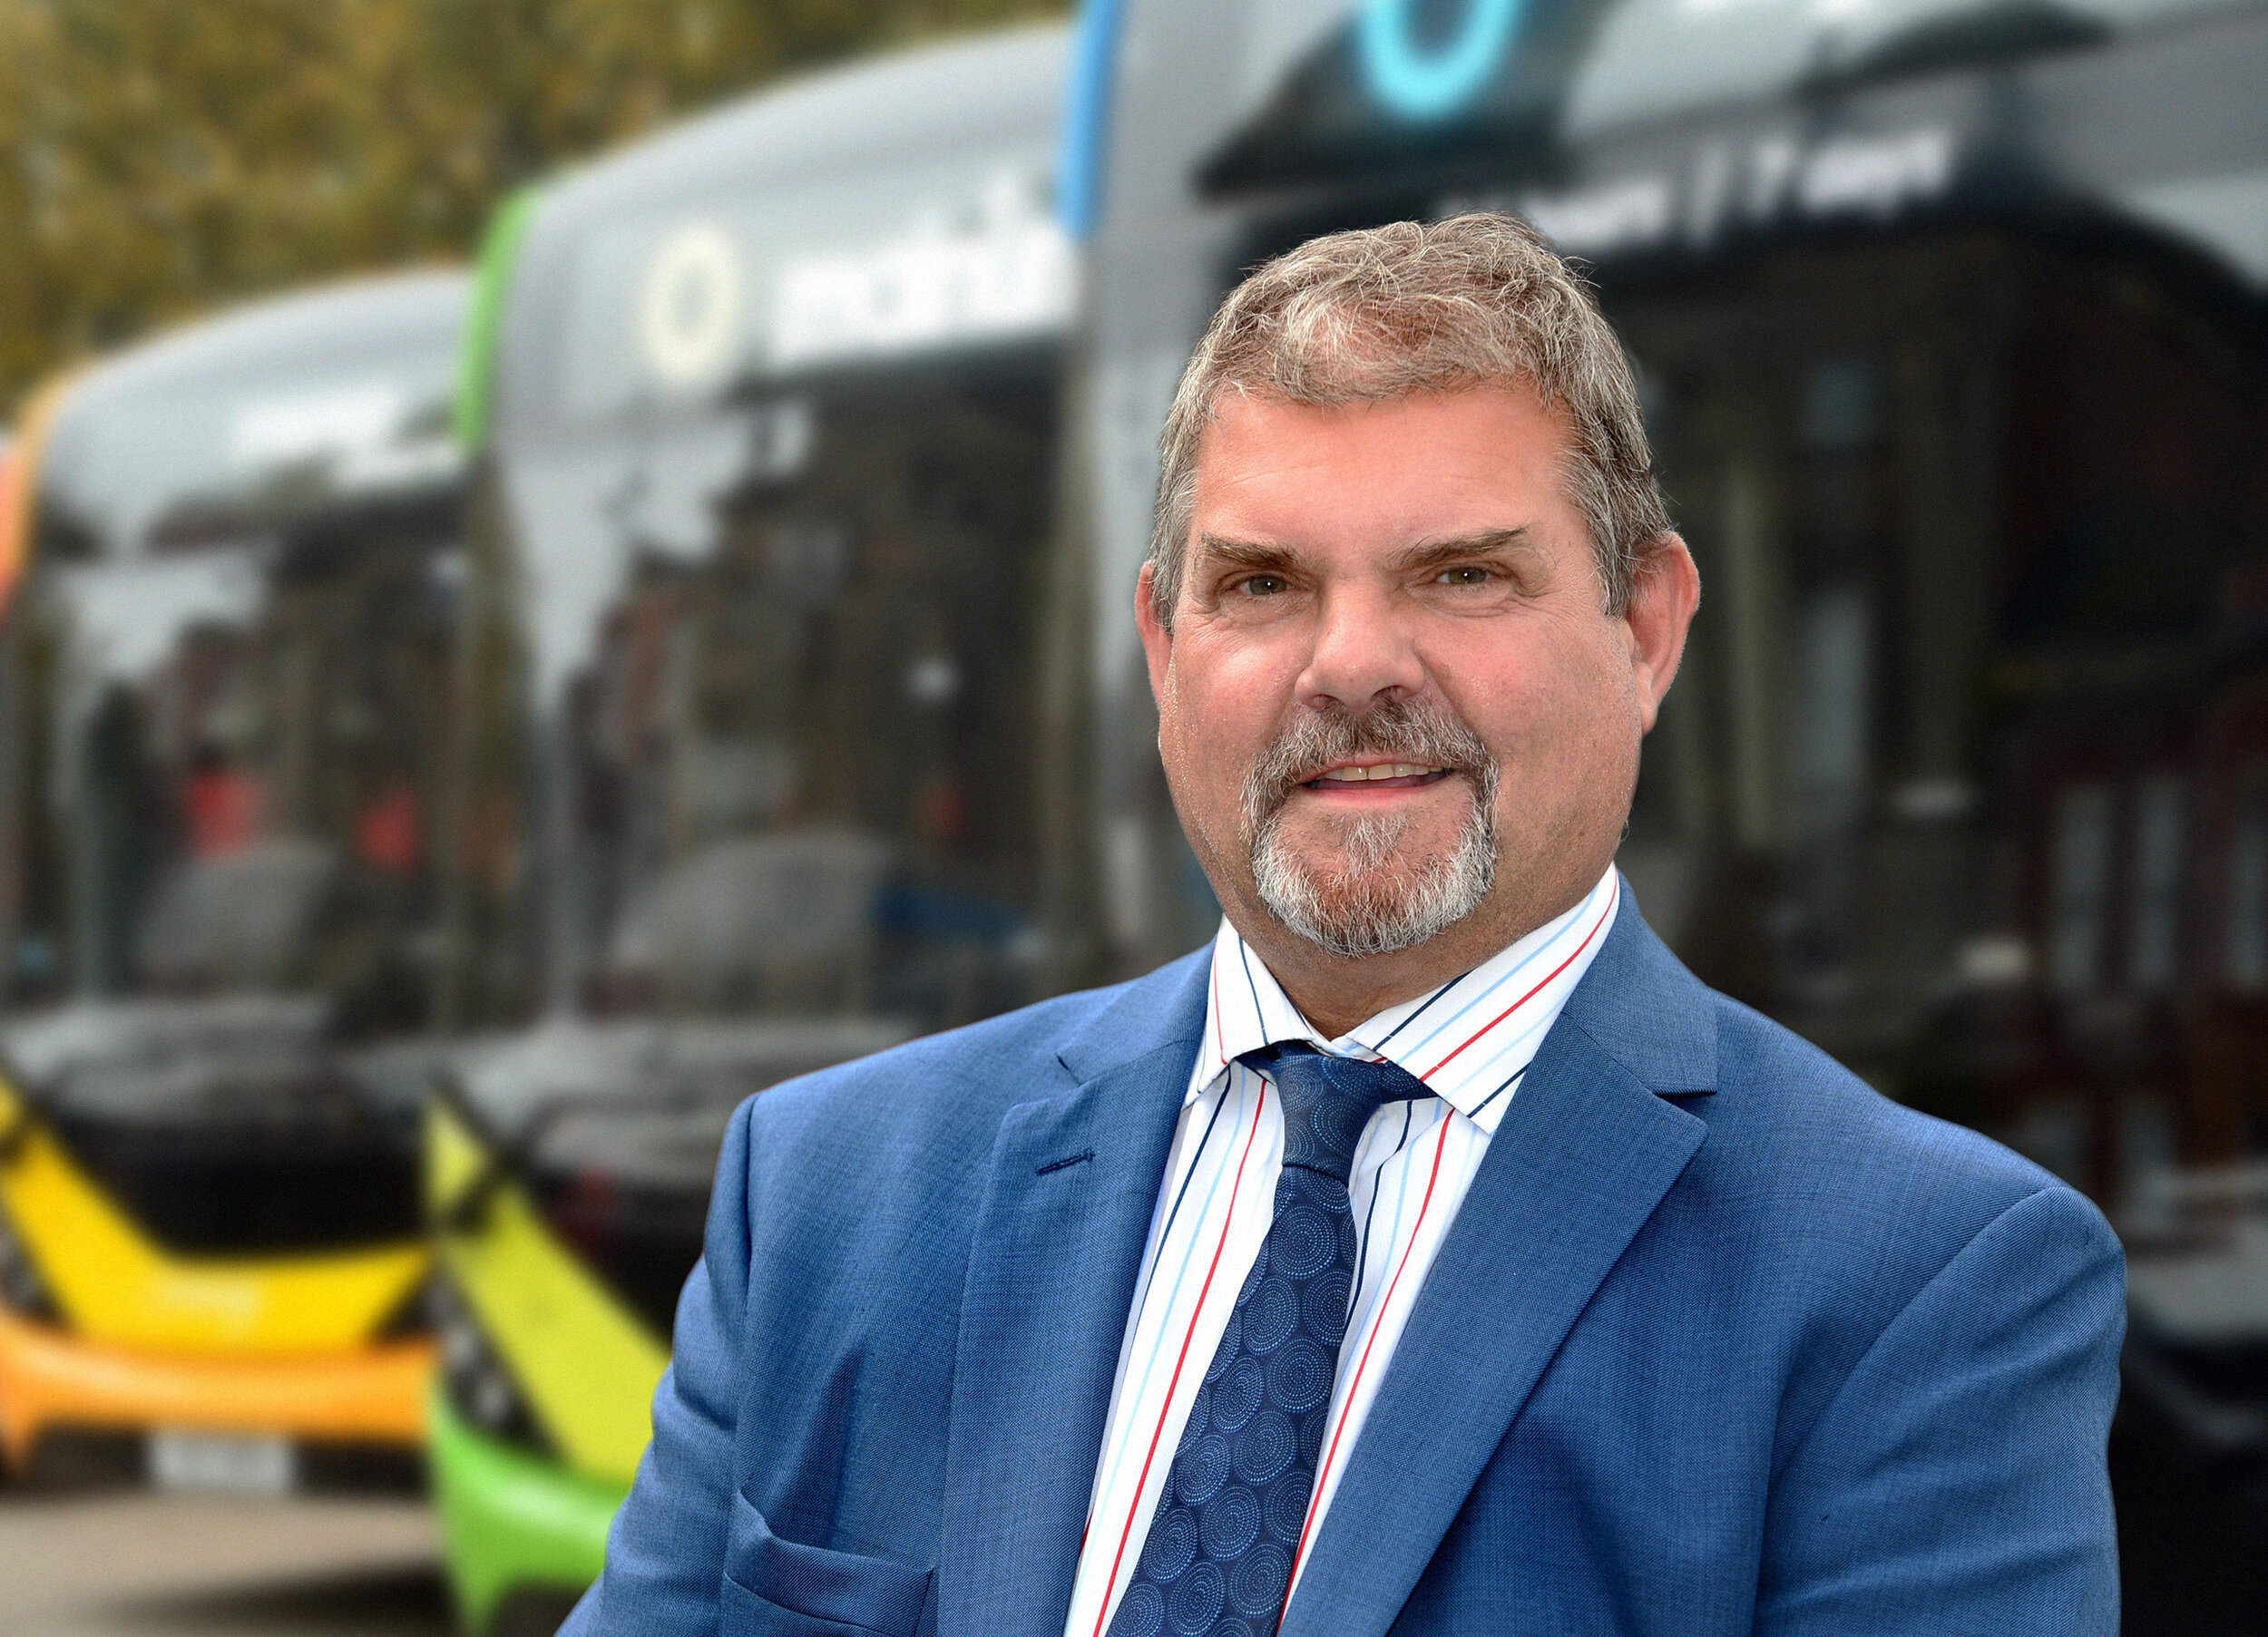 Extensive testing shows bus travel is Covid-safe